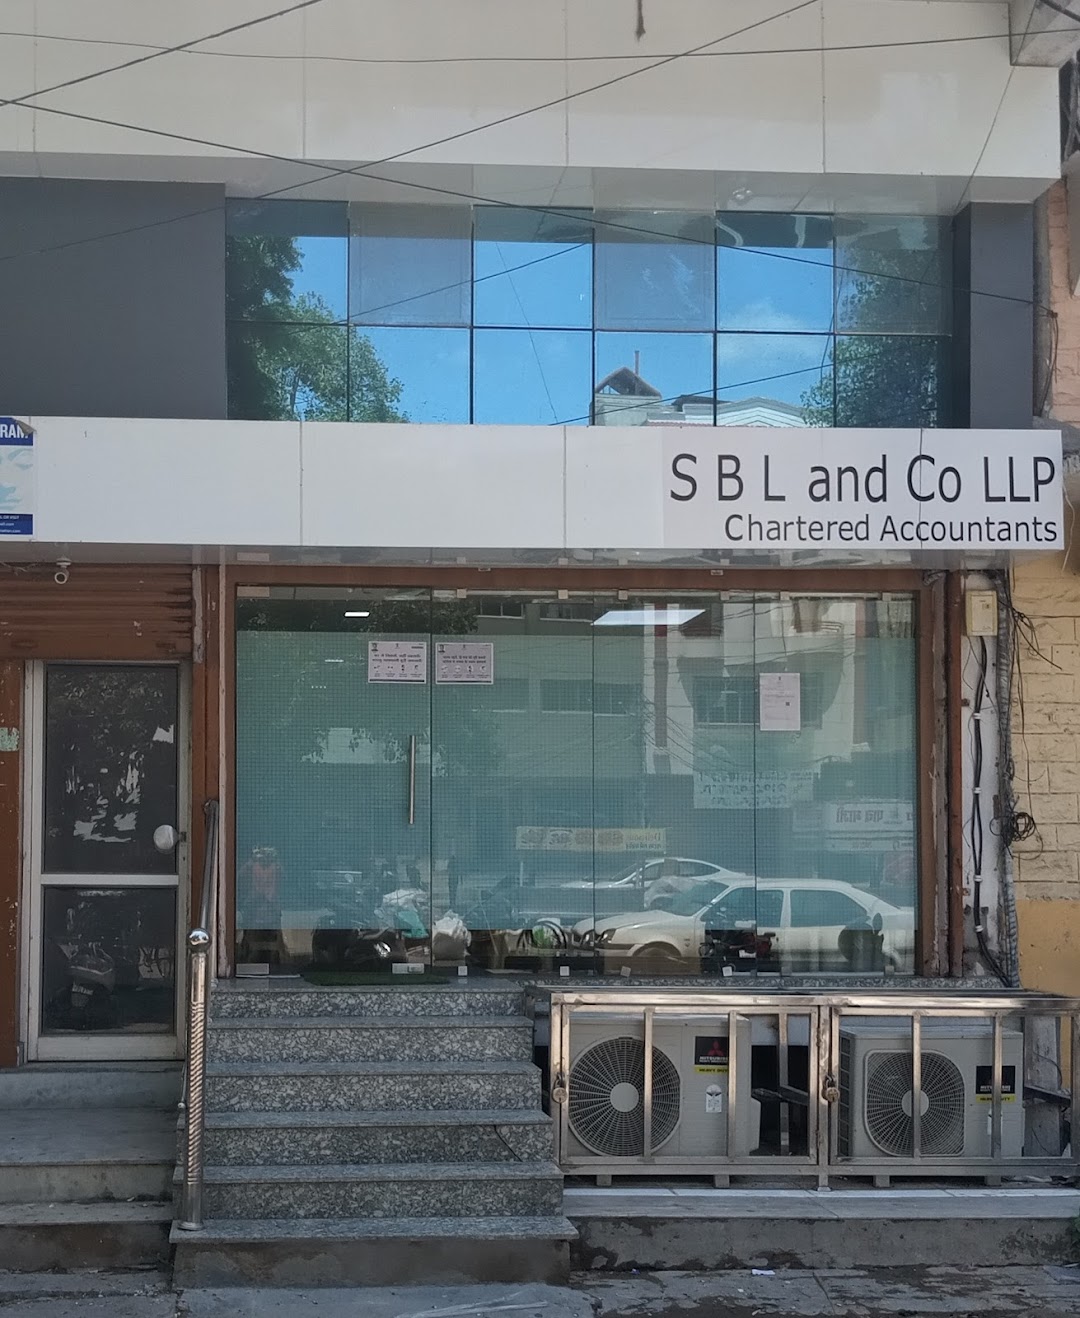 S B L and Co LLP